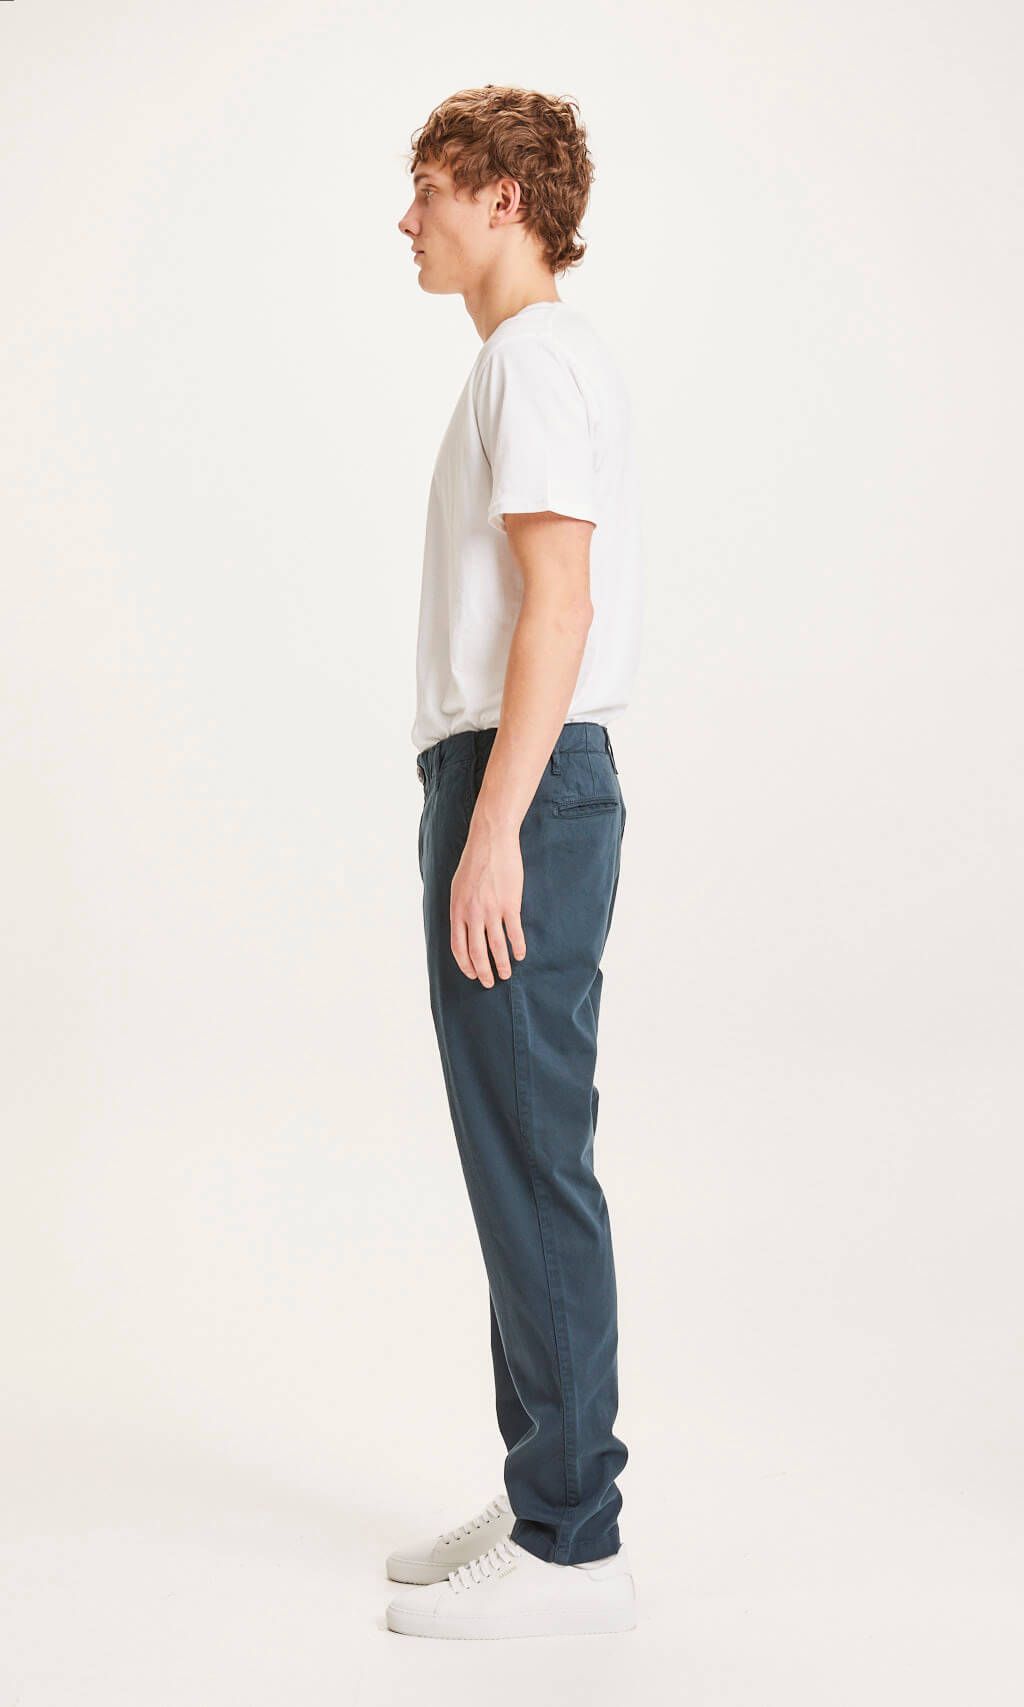 Chuck Regular Stretched Chino Pant Total Eclipse 30/30